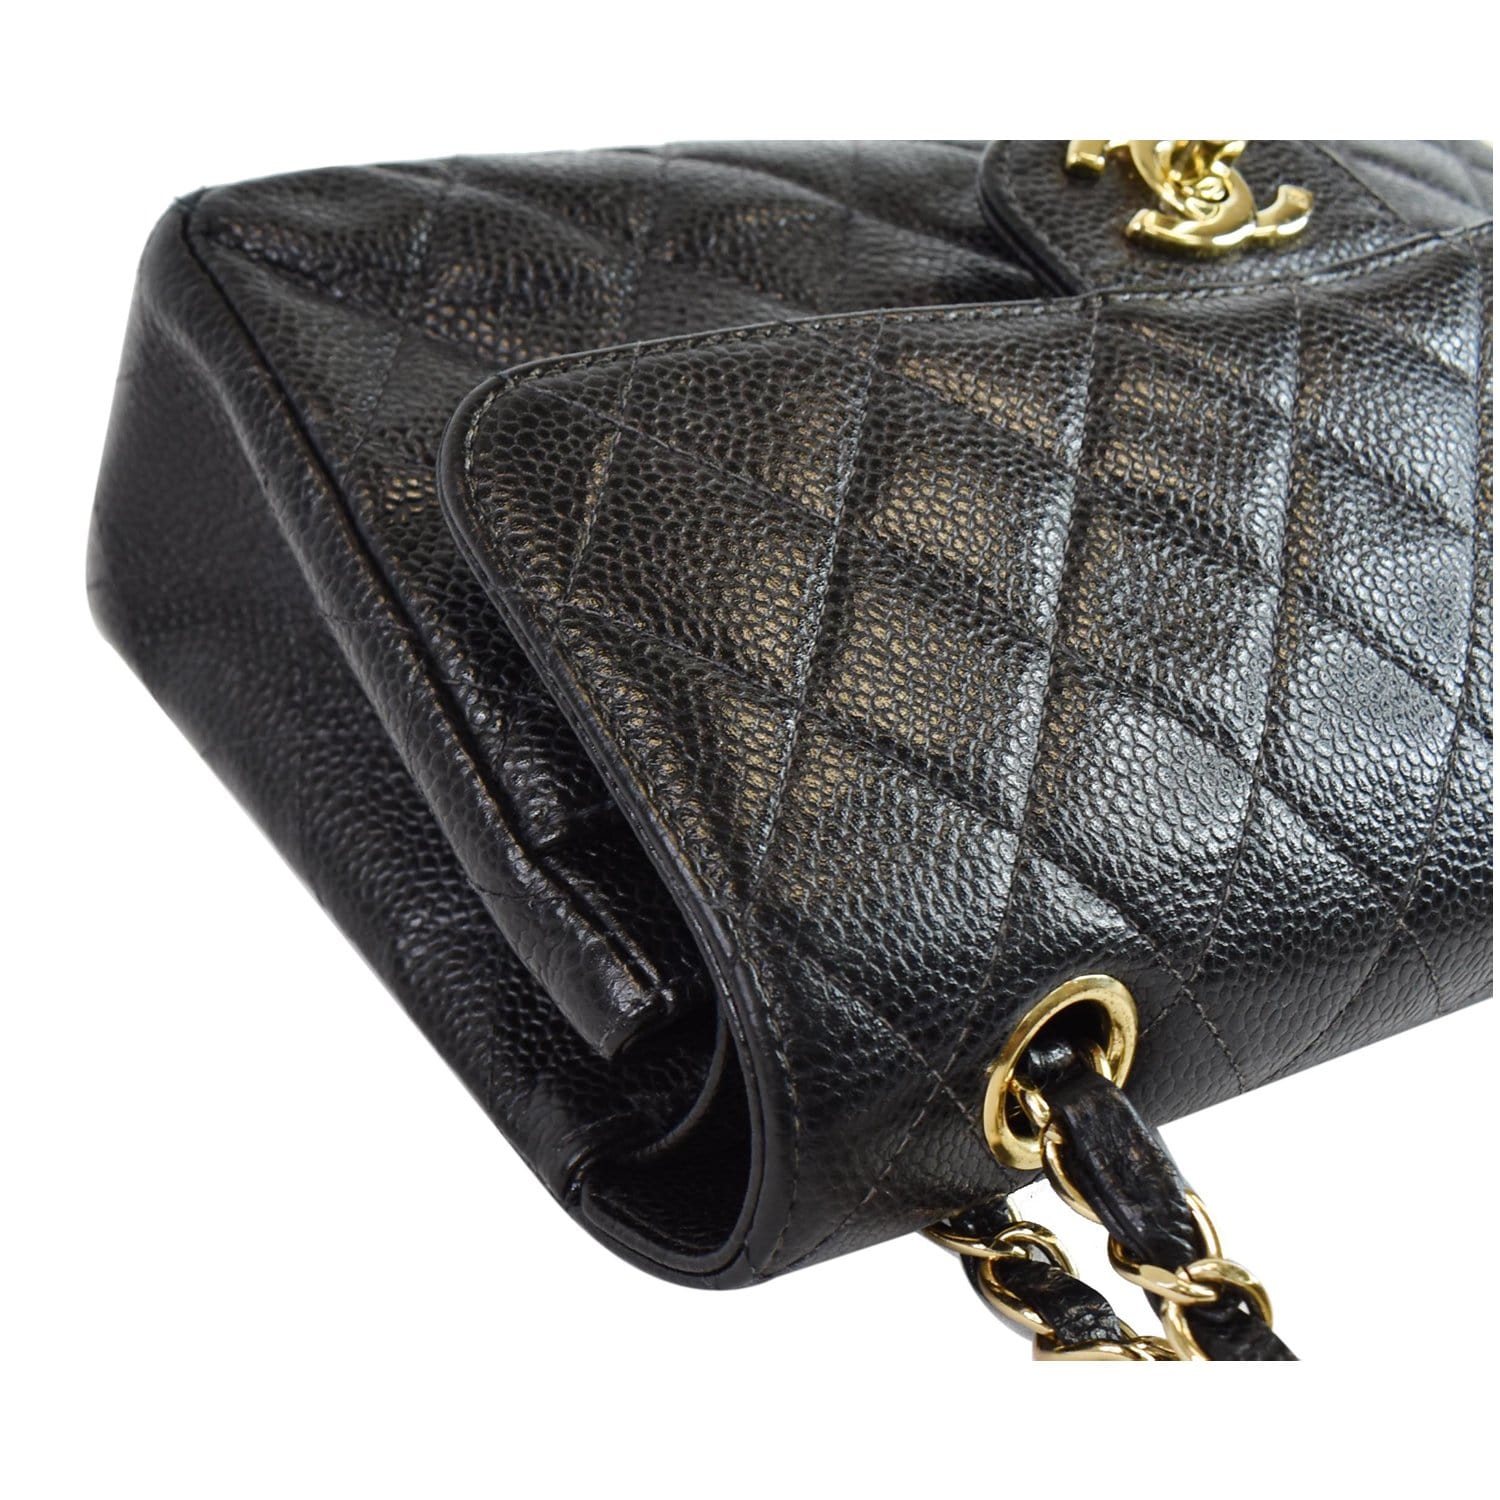 CHANEL Small Double Flap Caviar Quilted Leather Shoulder Bag Black